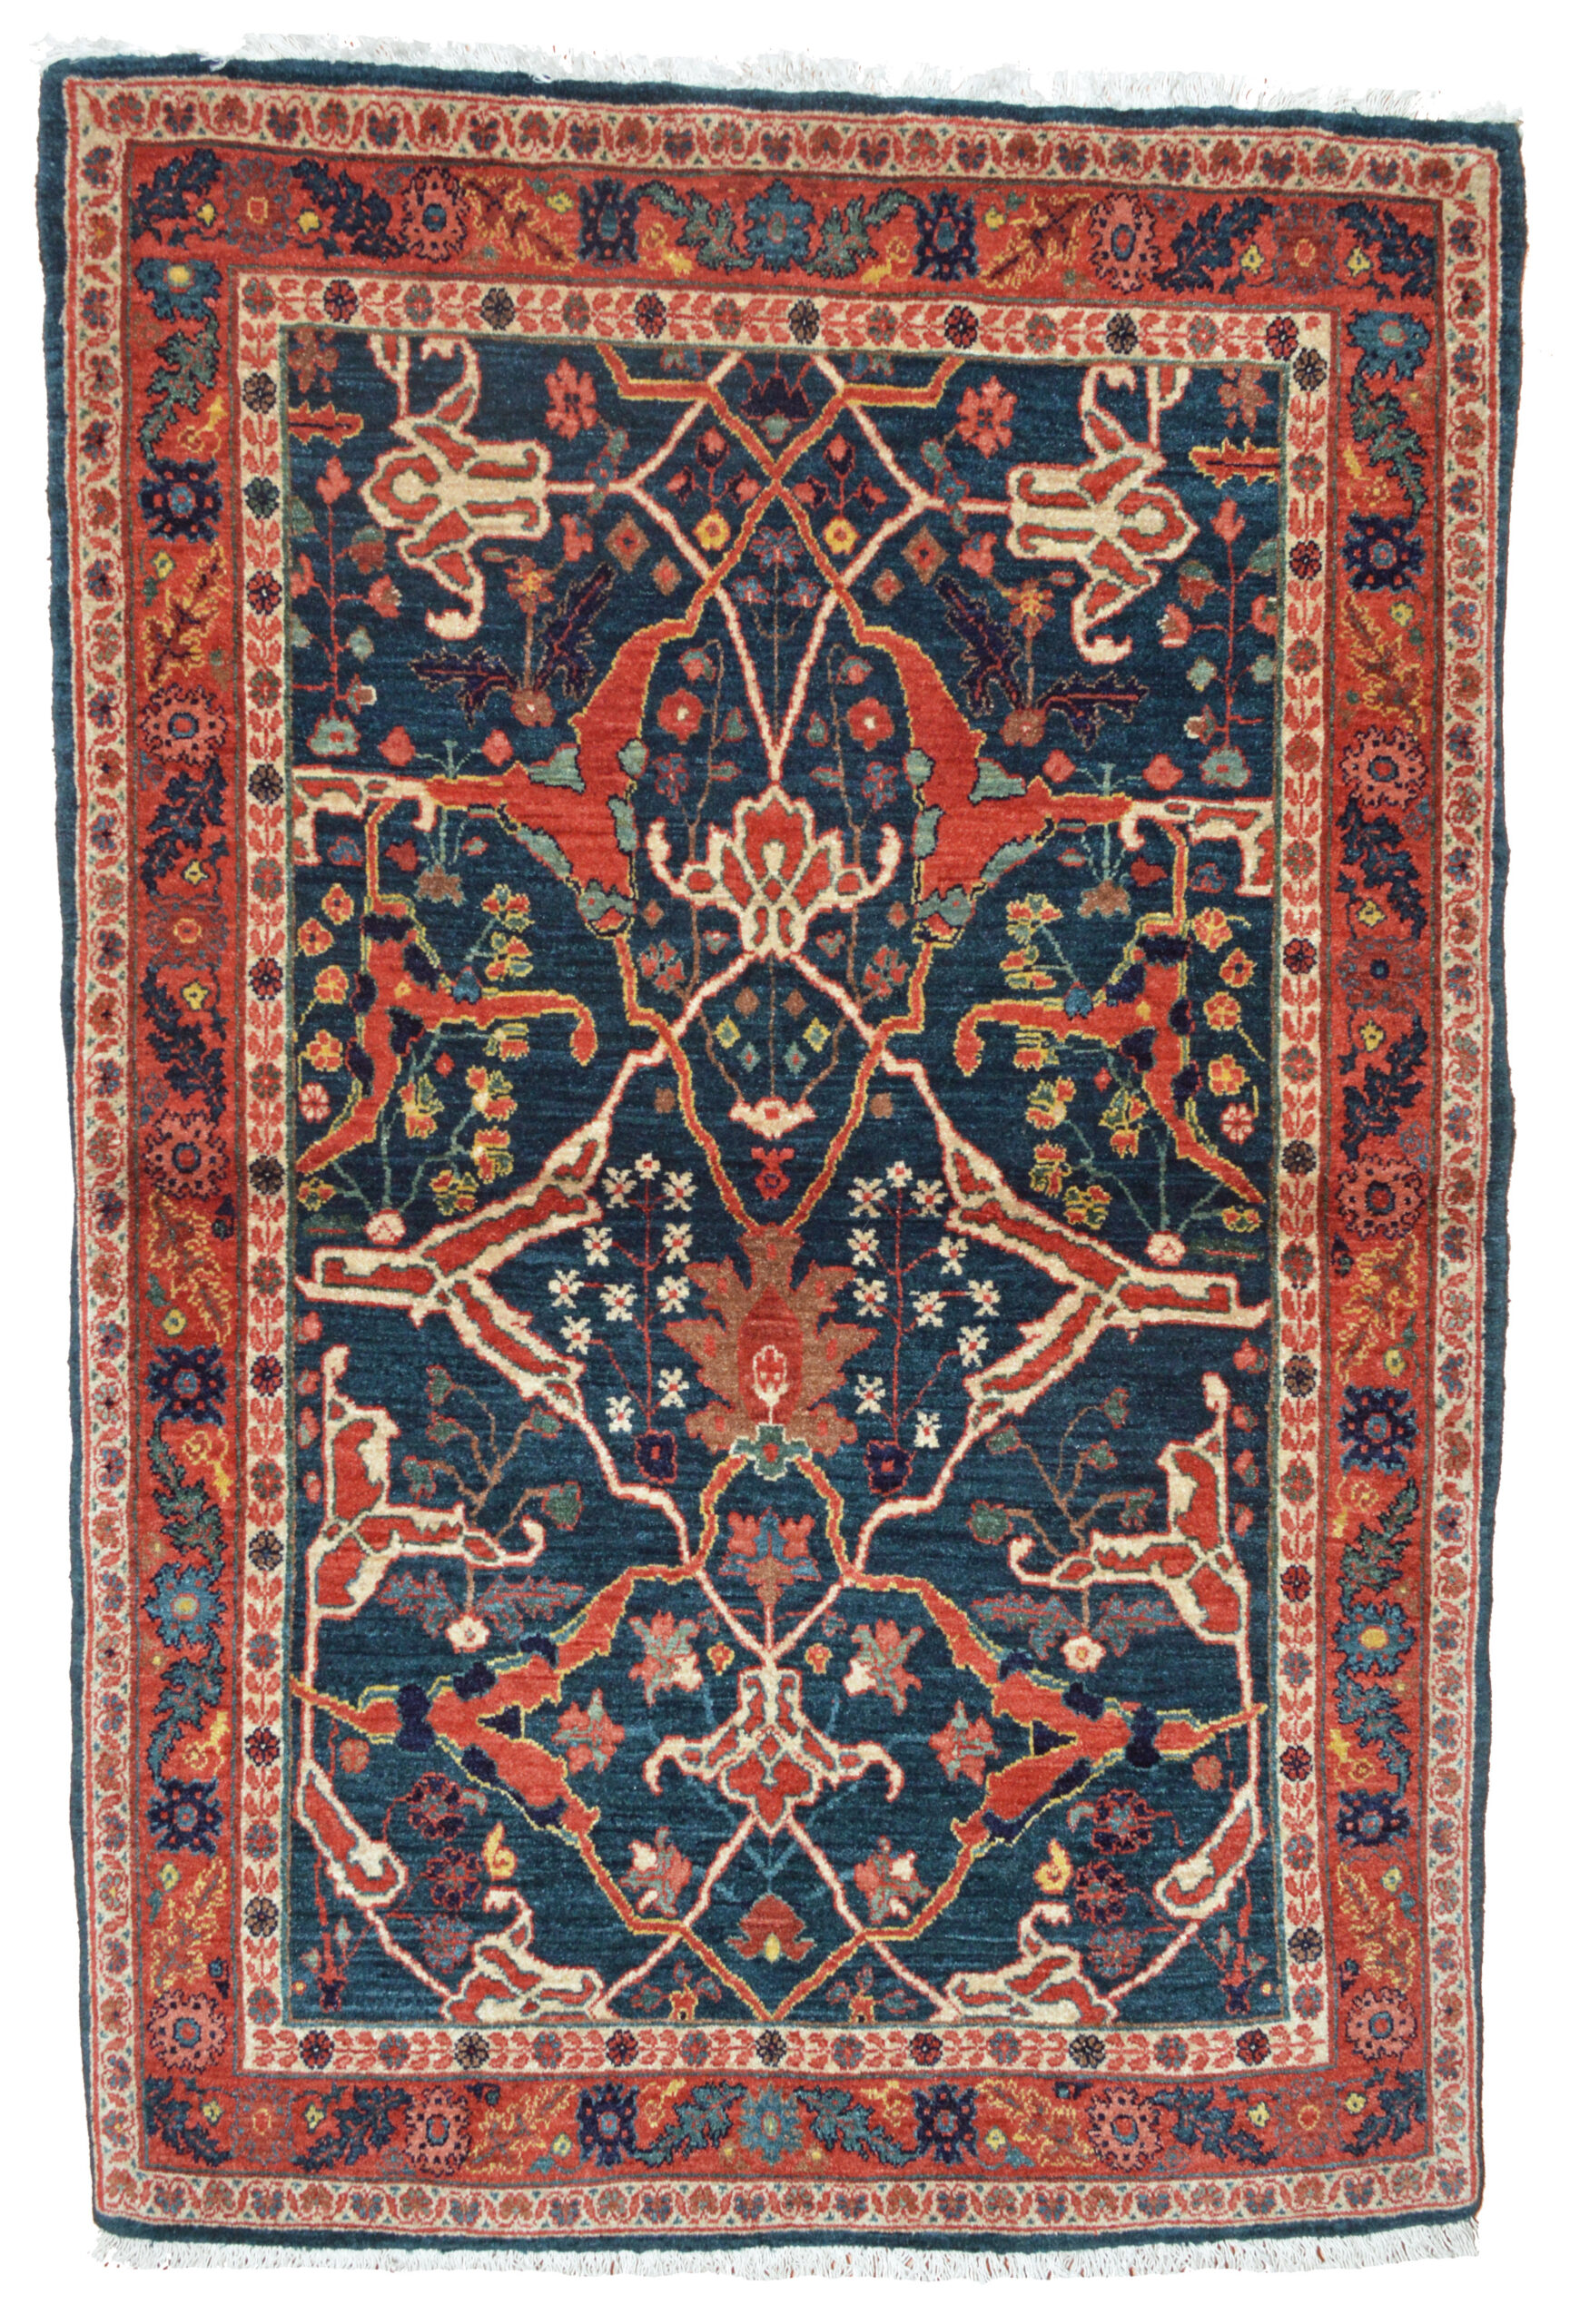 New, hand woven Bidjar rug with a Split Arabesque design on a teal color field. Doulas Stock Gallery, antique and contemporary Oriental rugs Boston,MA area New England